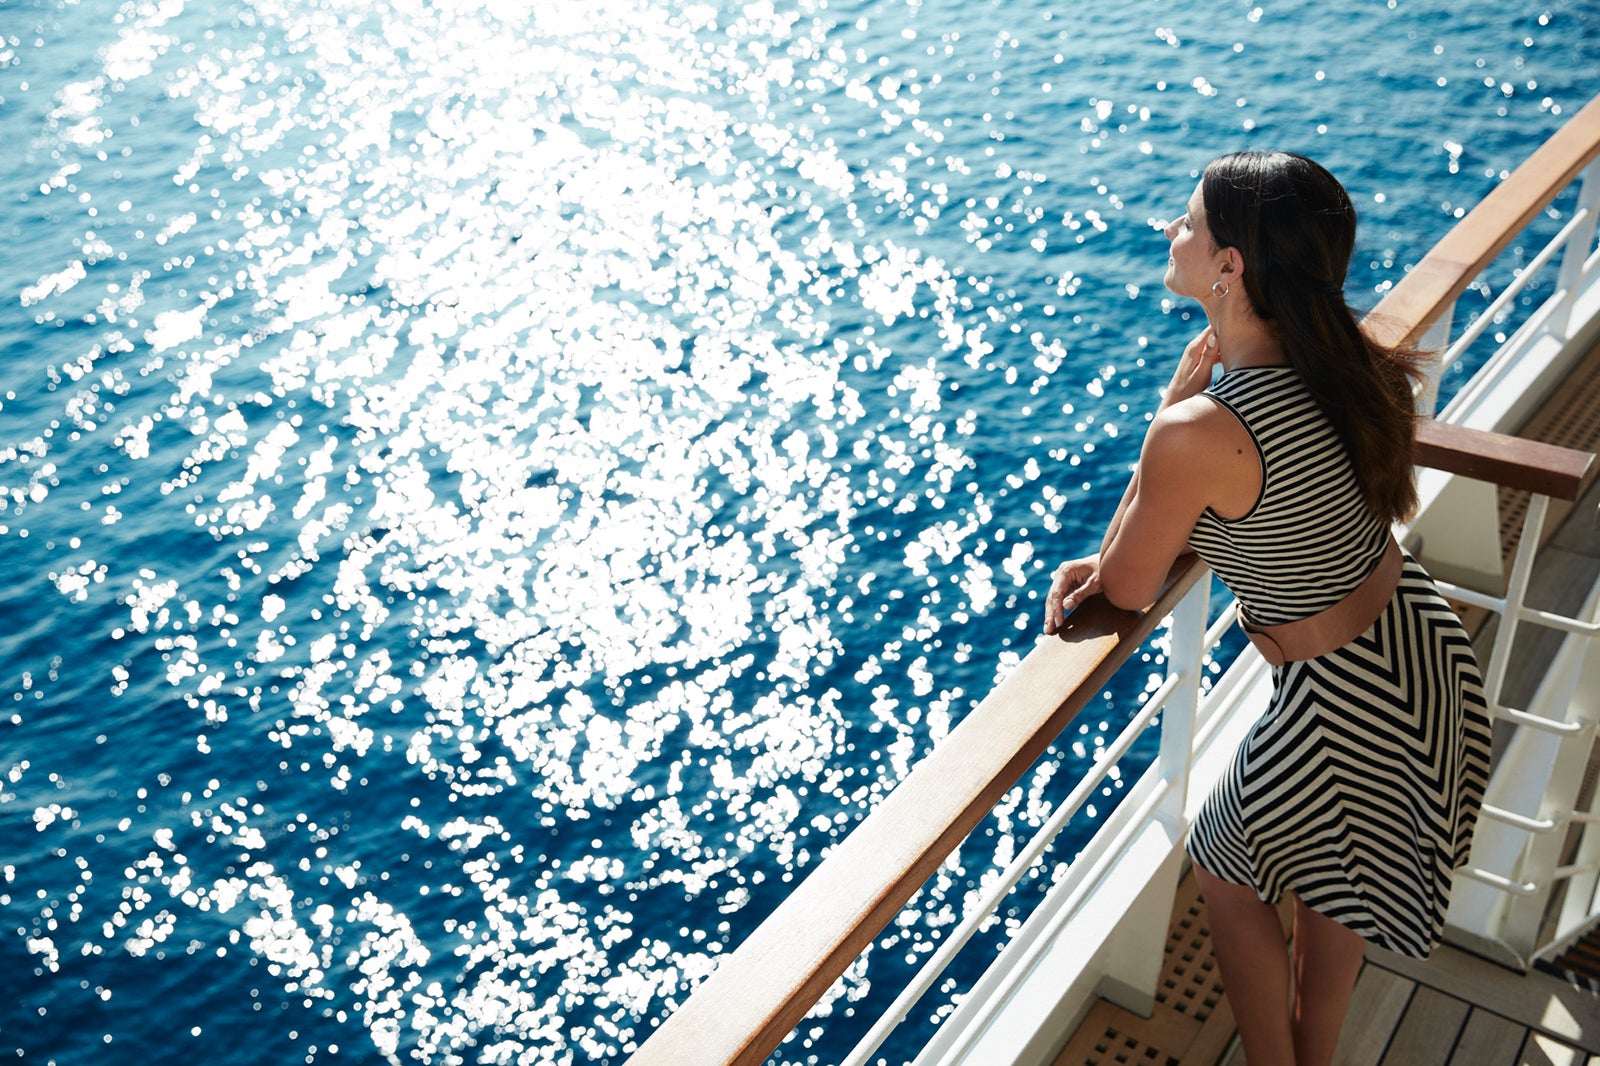 Great singles cruises to book and meet fascinating people